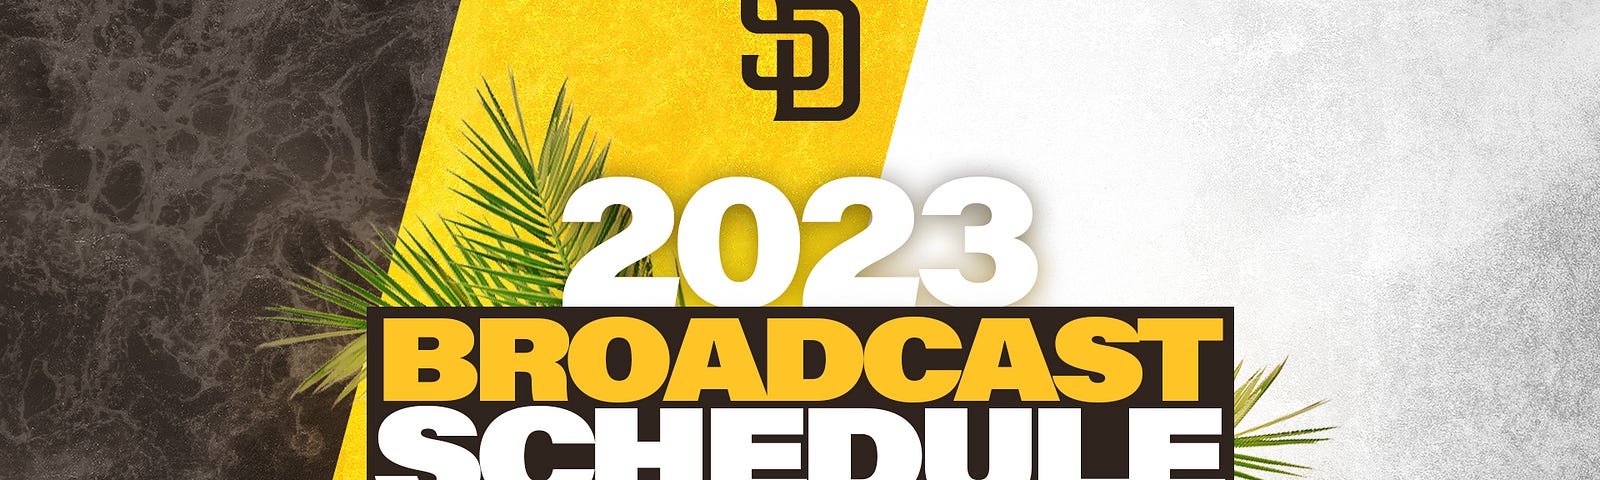 Padres To Wear Pacific Coast League Uniforms on April 17, by FriarWire